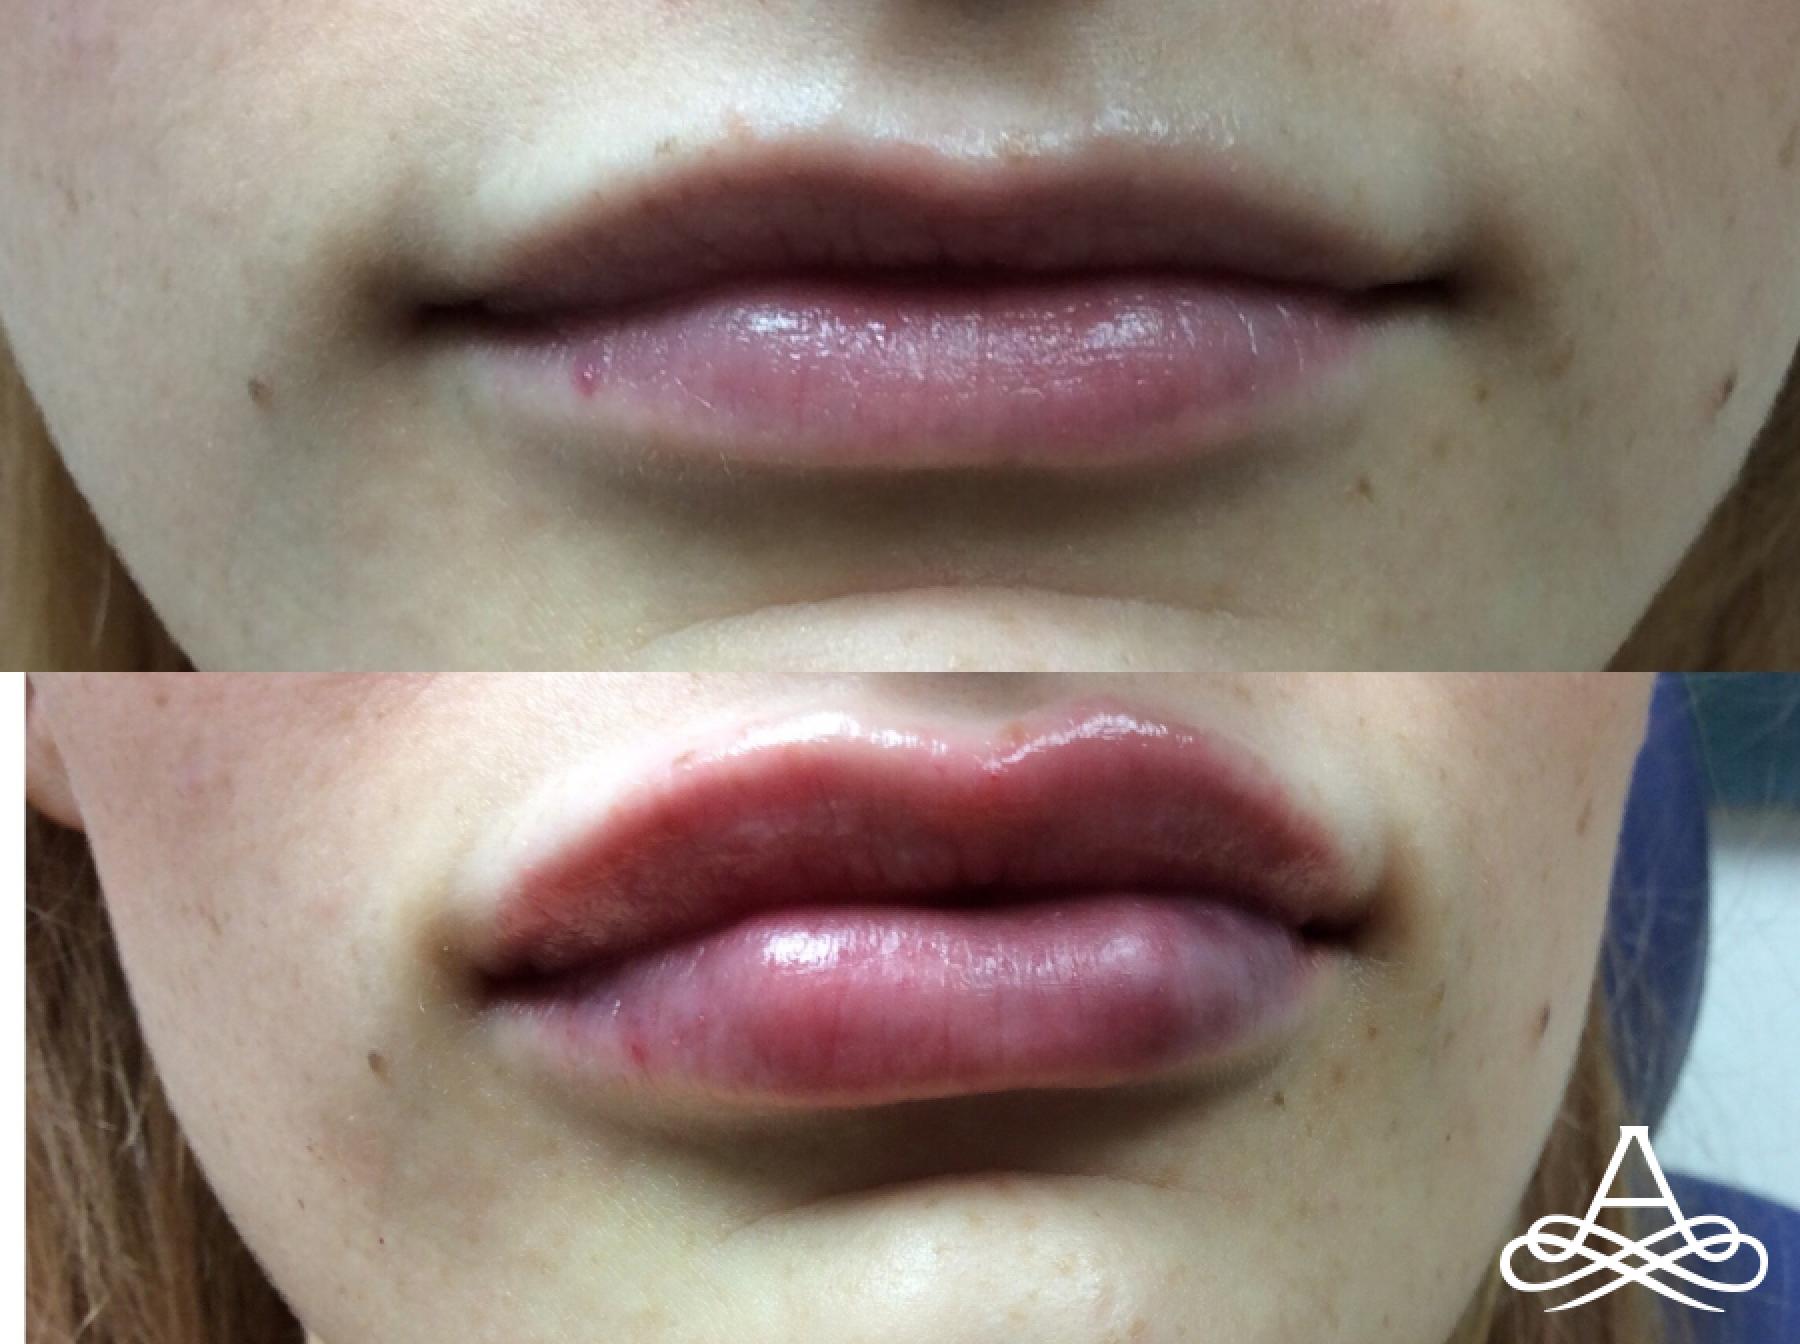 Lip Filler: Patient 7 - Before and After 1